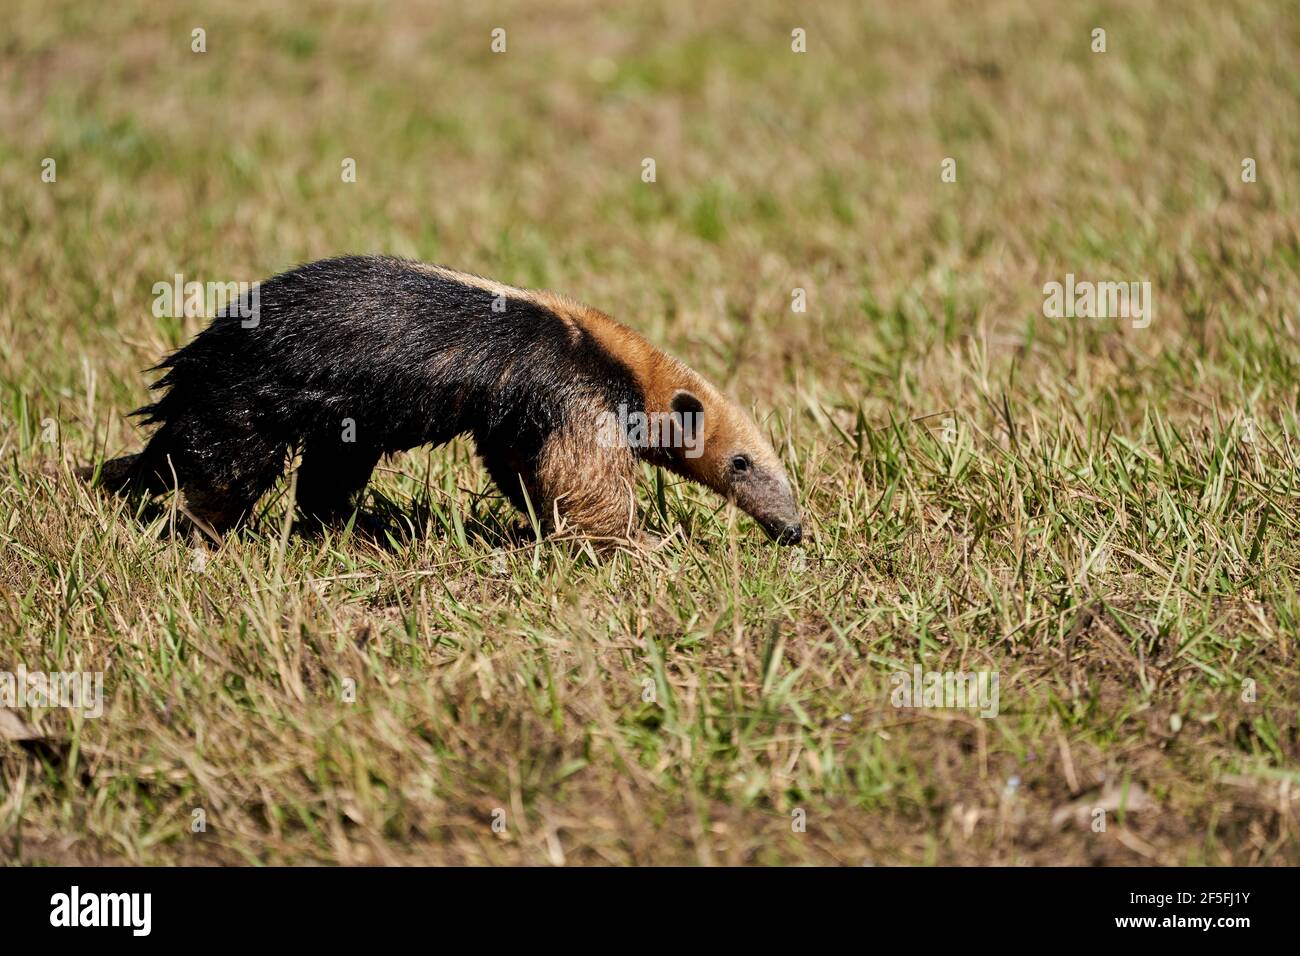 southern tamandua, Tamandua tetradactyla, also collared anteater or lesser anteater, is a species of anteater from South America, foraging on a meadow Stock Photo